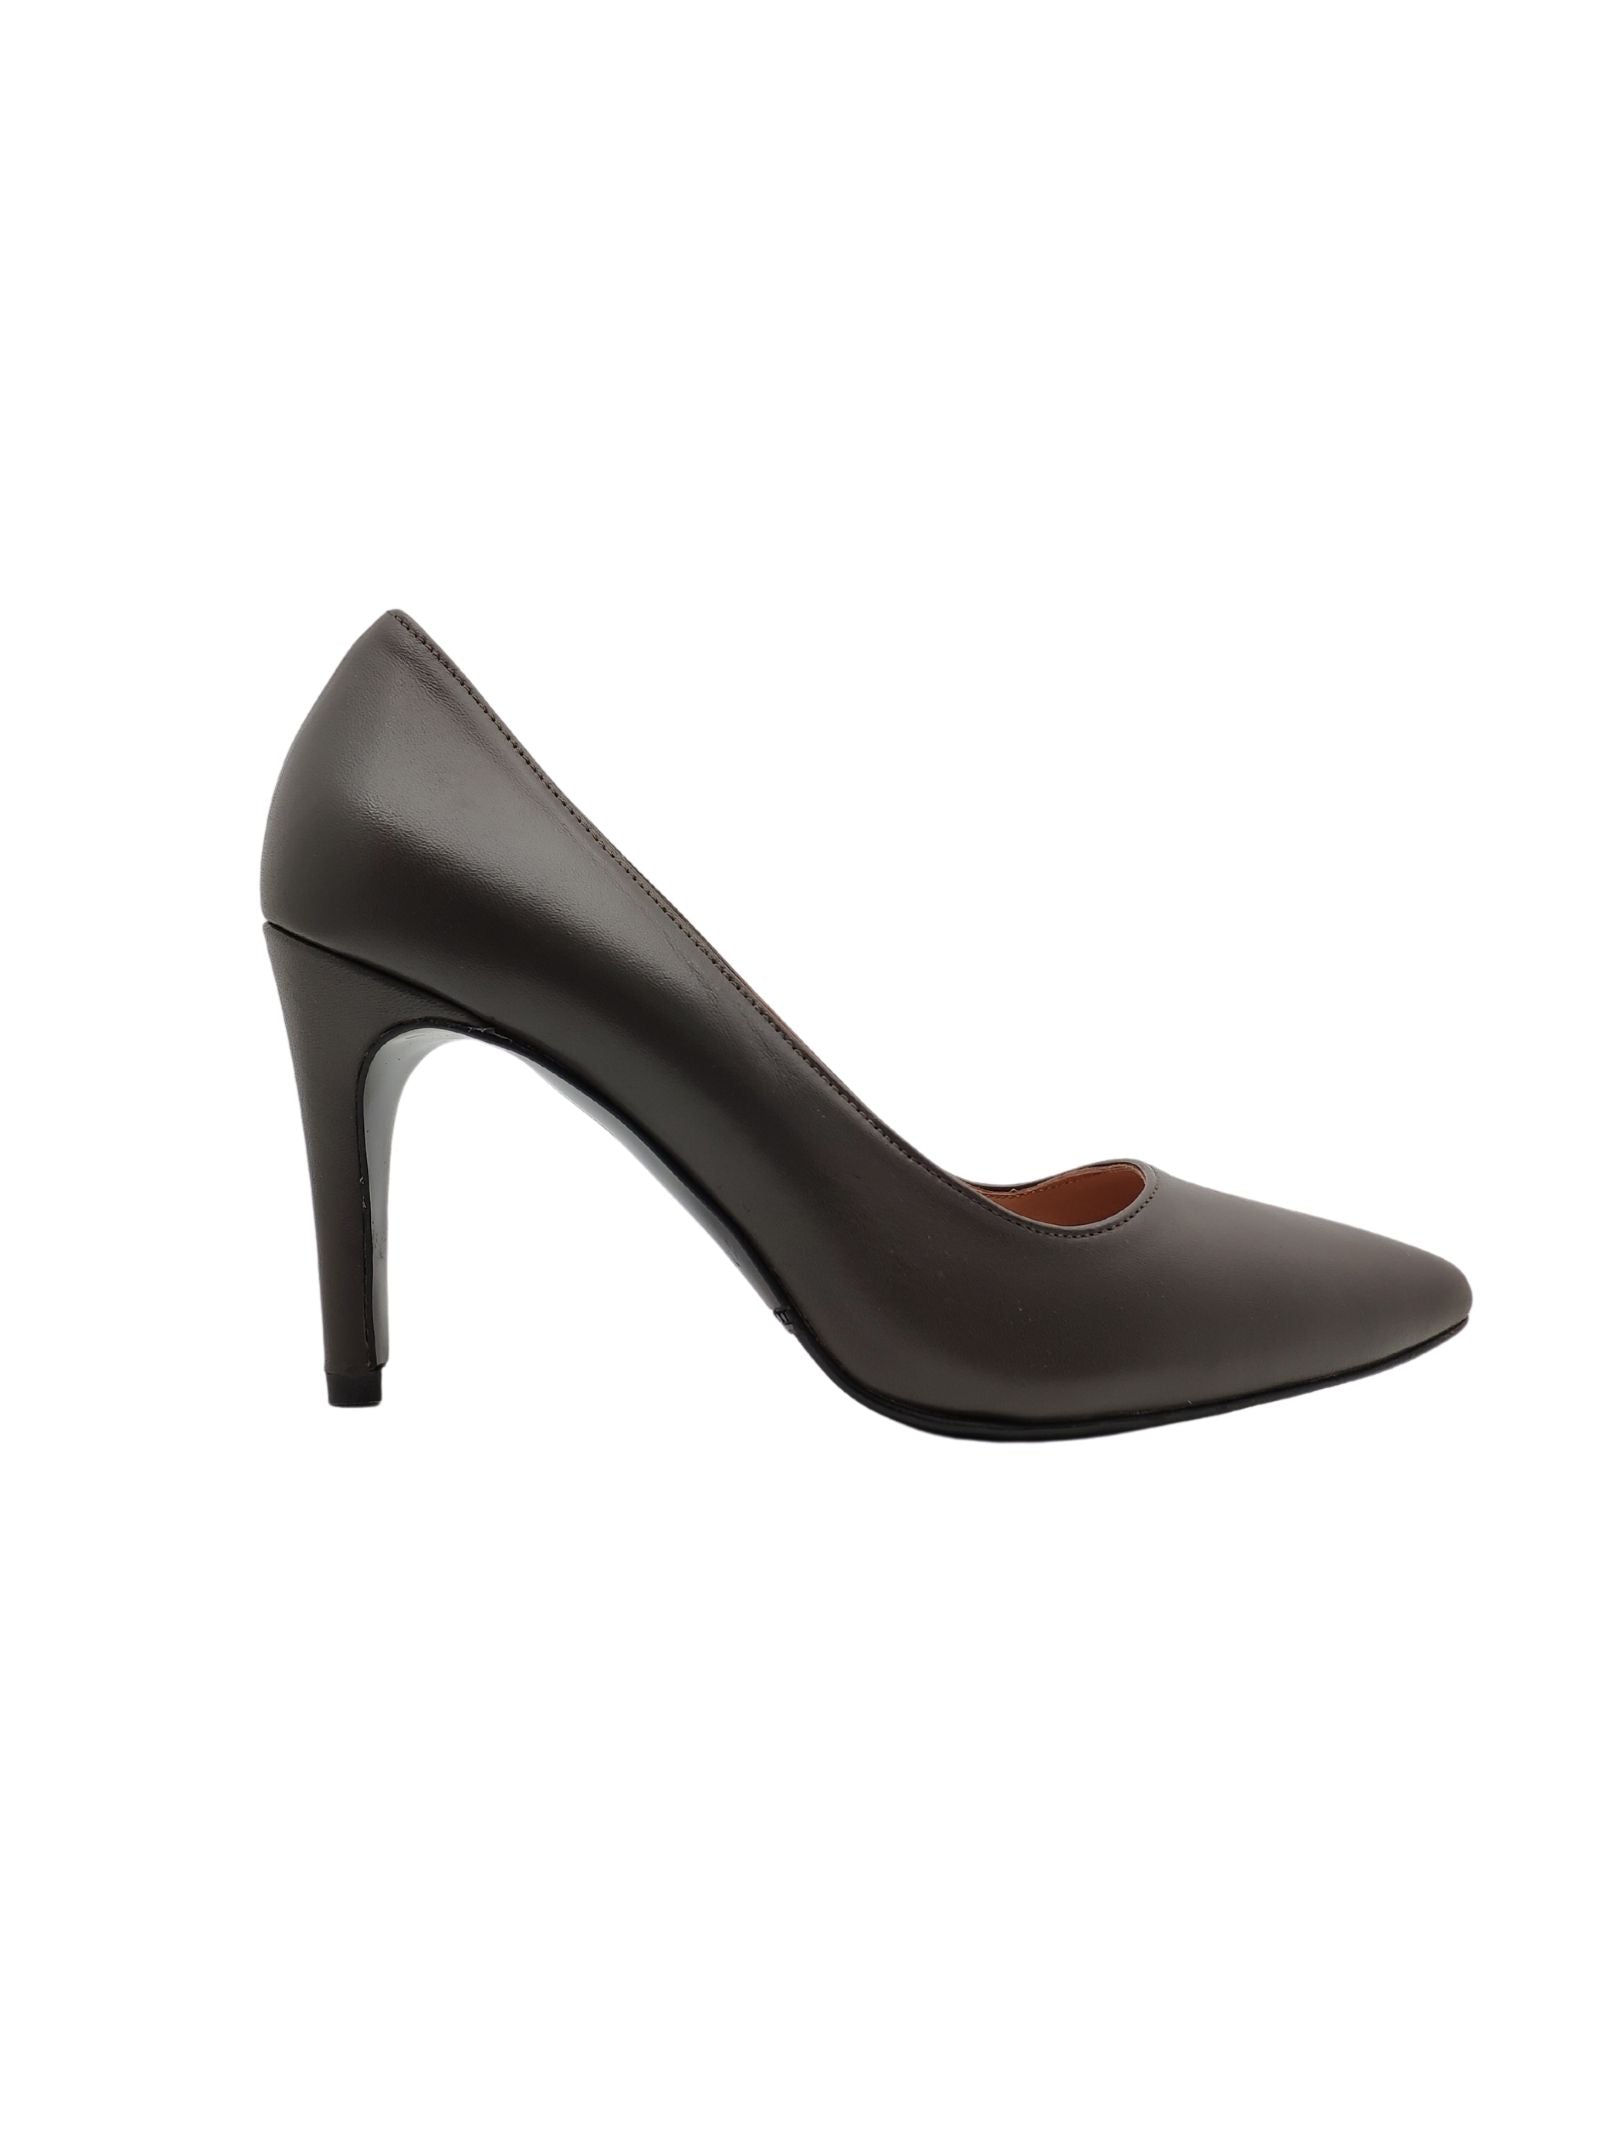 Women's Shoes Décolleté In Taupe Leather With High Heel